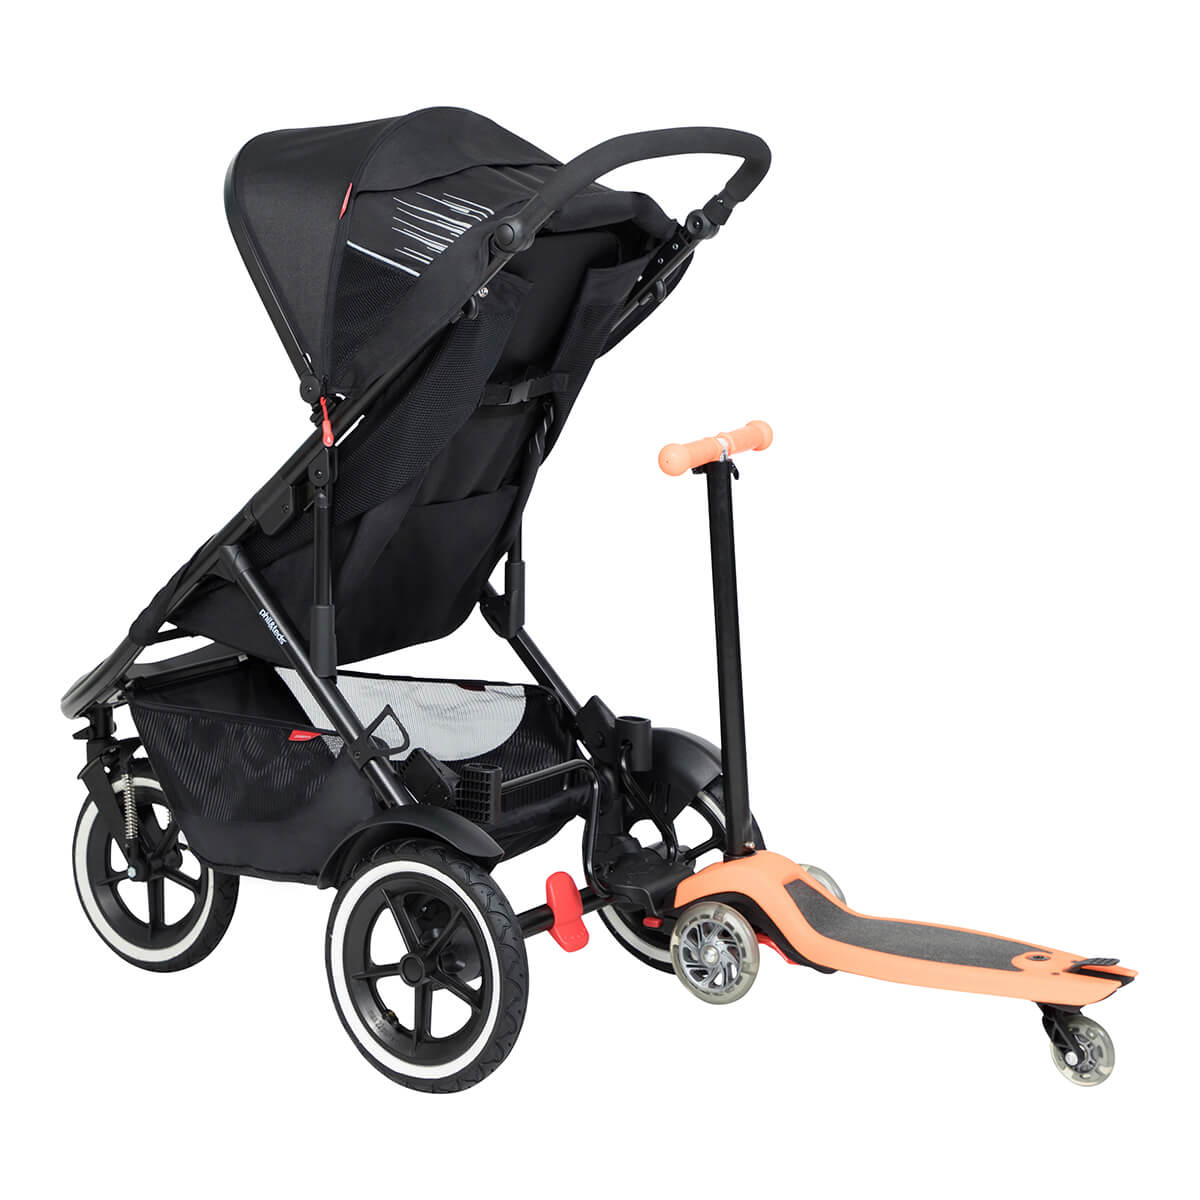 https://cdn.accentuate.io/7266900738101/19118870757429/philteds-sport-buggy-with-freerider-stroller-board-in-rear-v1700693467333.jpg?1200x1200